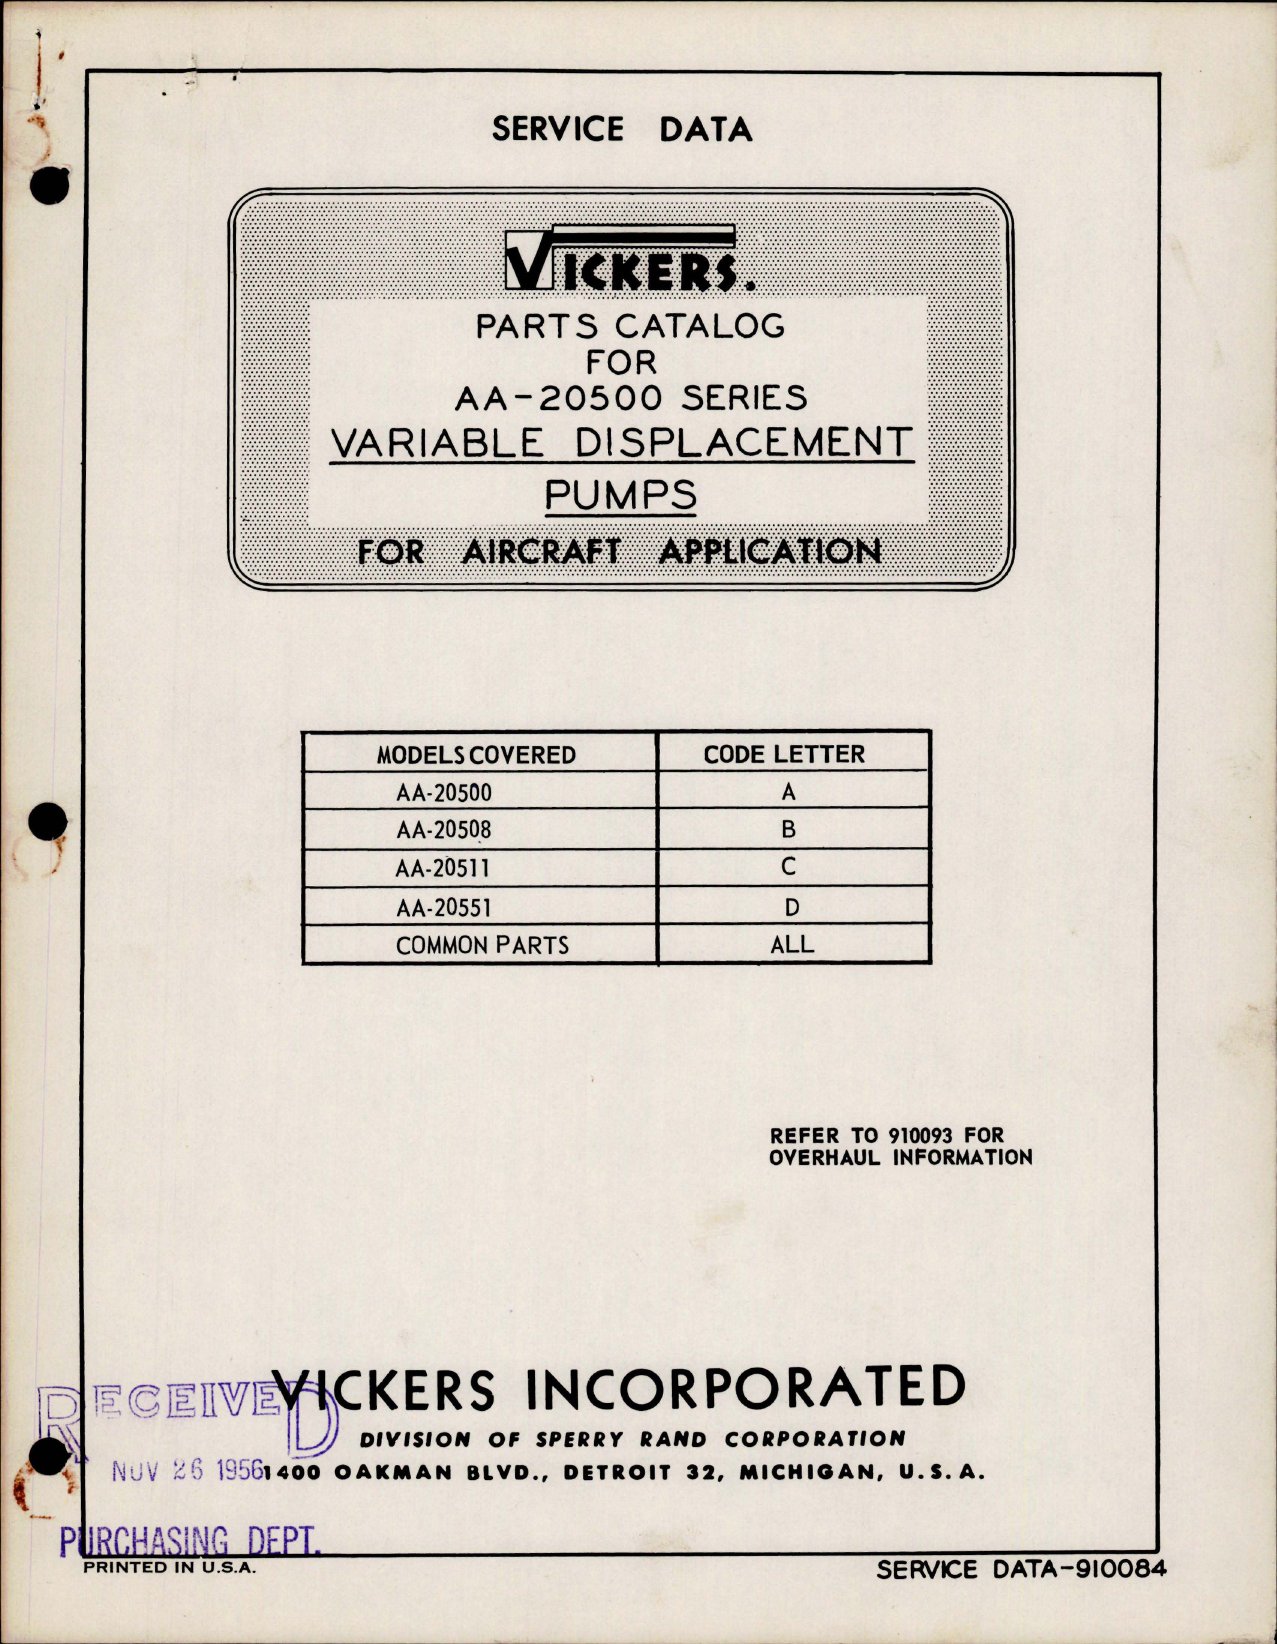 Sample page 1 from AirCorps Library document: Parts Catalog for Variable Displacement Pumps - AA-20500 Series